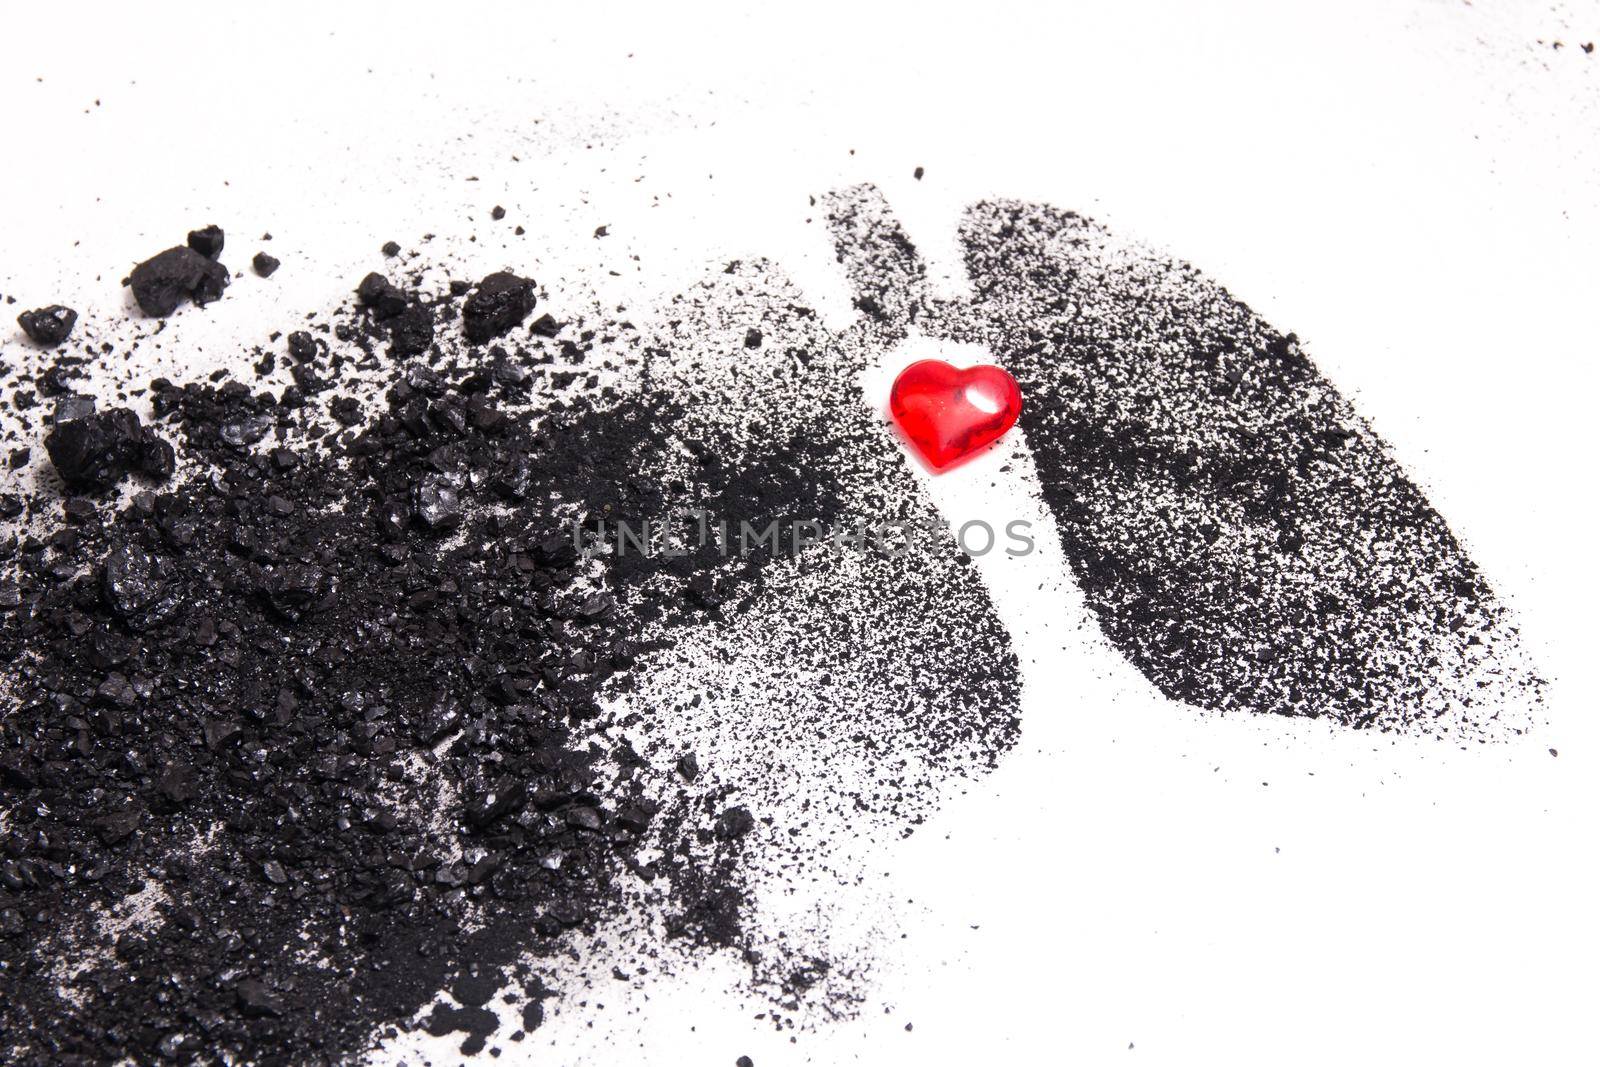 silhouette of human lungs from coal dust on a white background, lungs from pieces of coal and a small red glass heart, health care concept, respiratory diseases, copy space by natashko